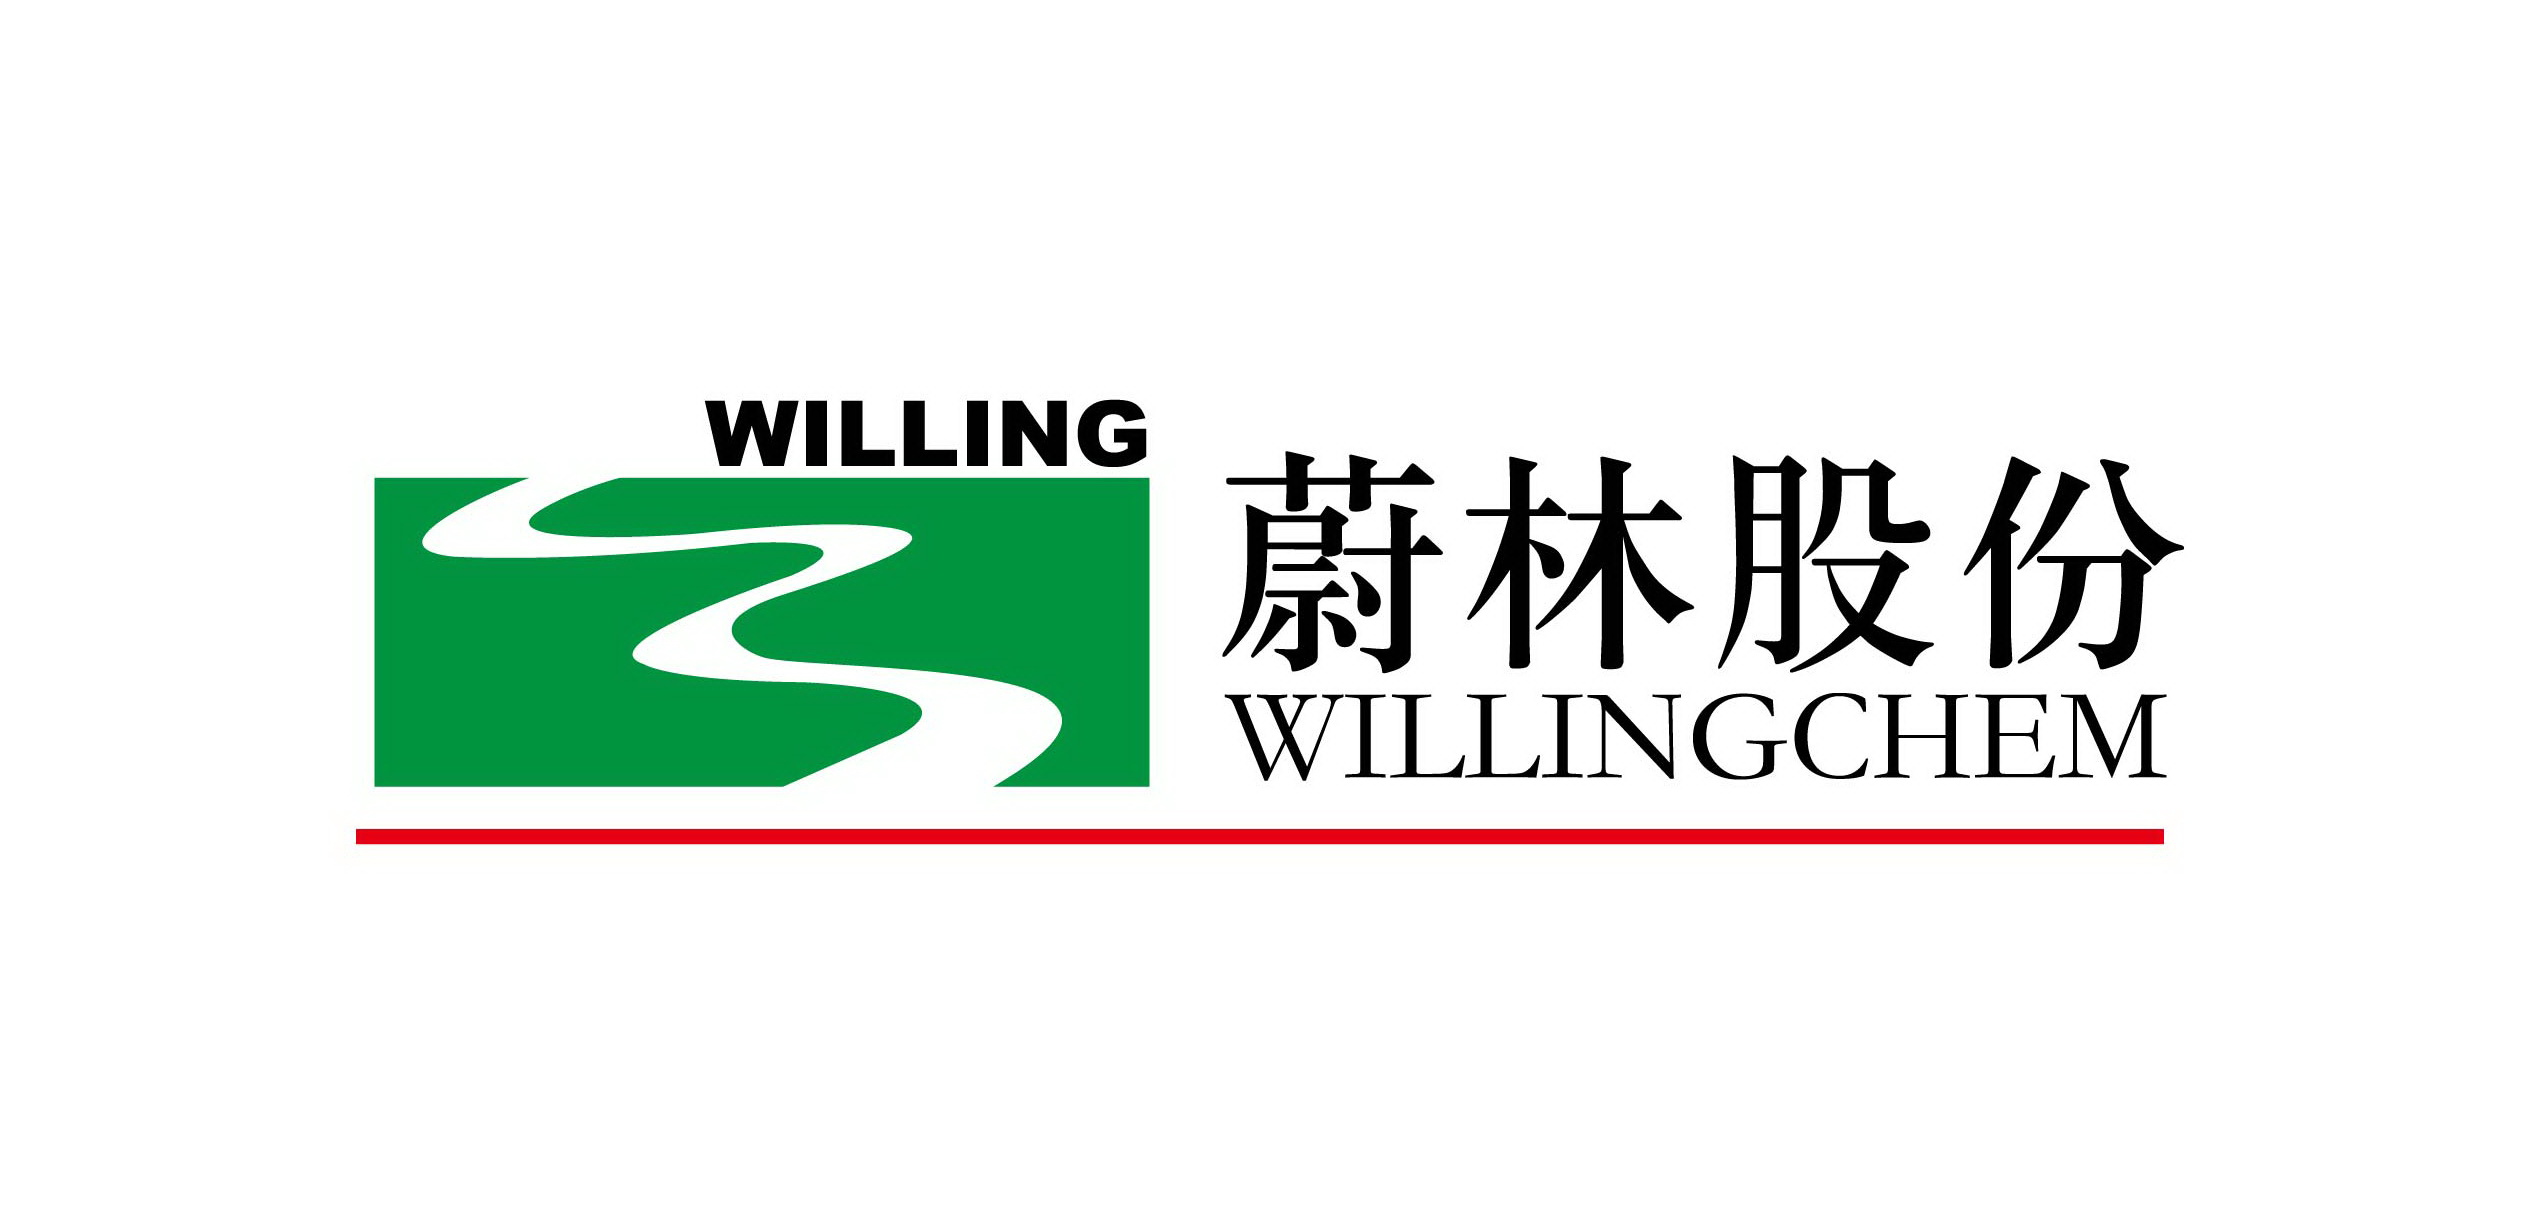 Willing New Materials Technology Co., Ltd.